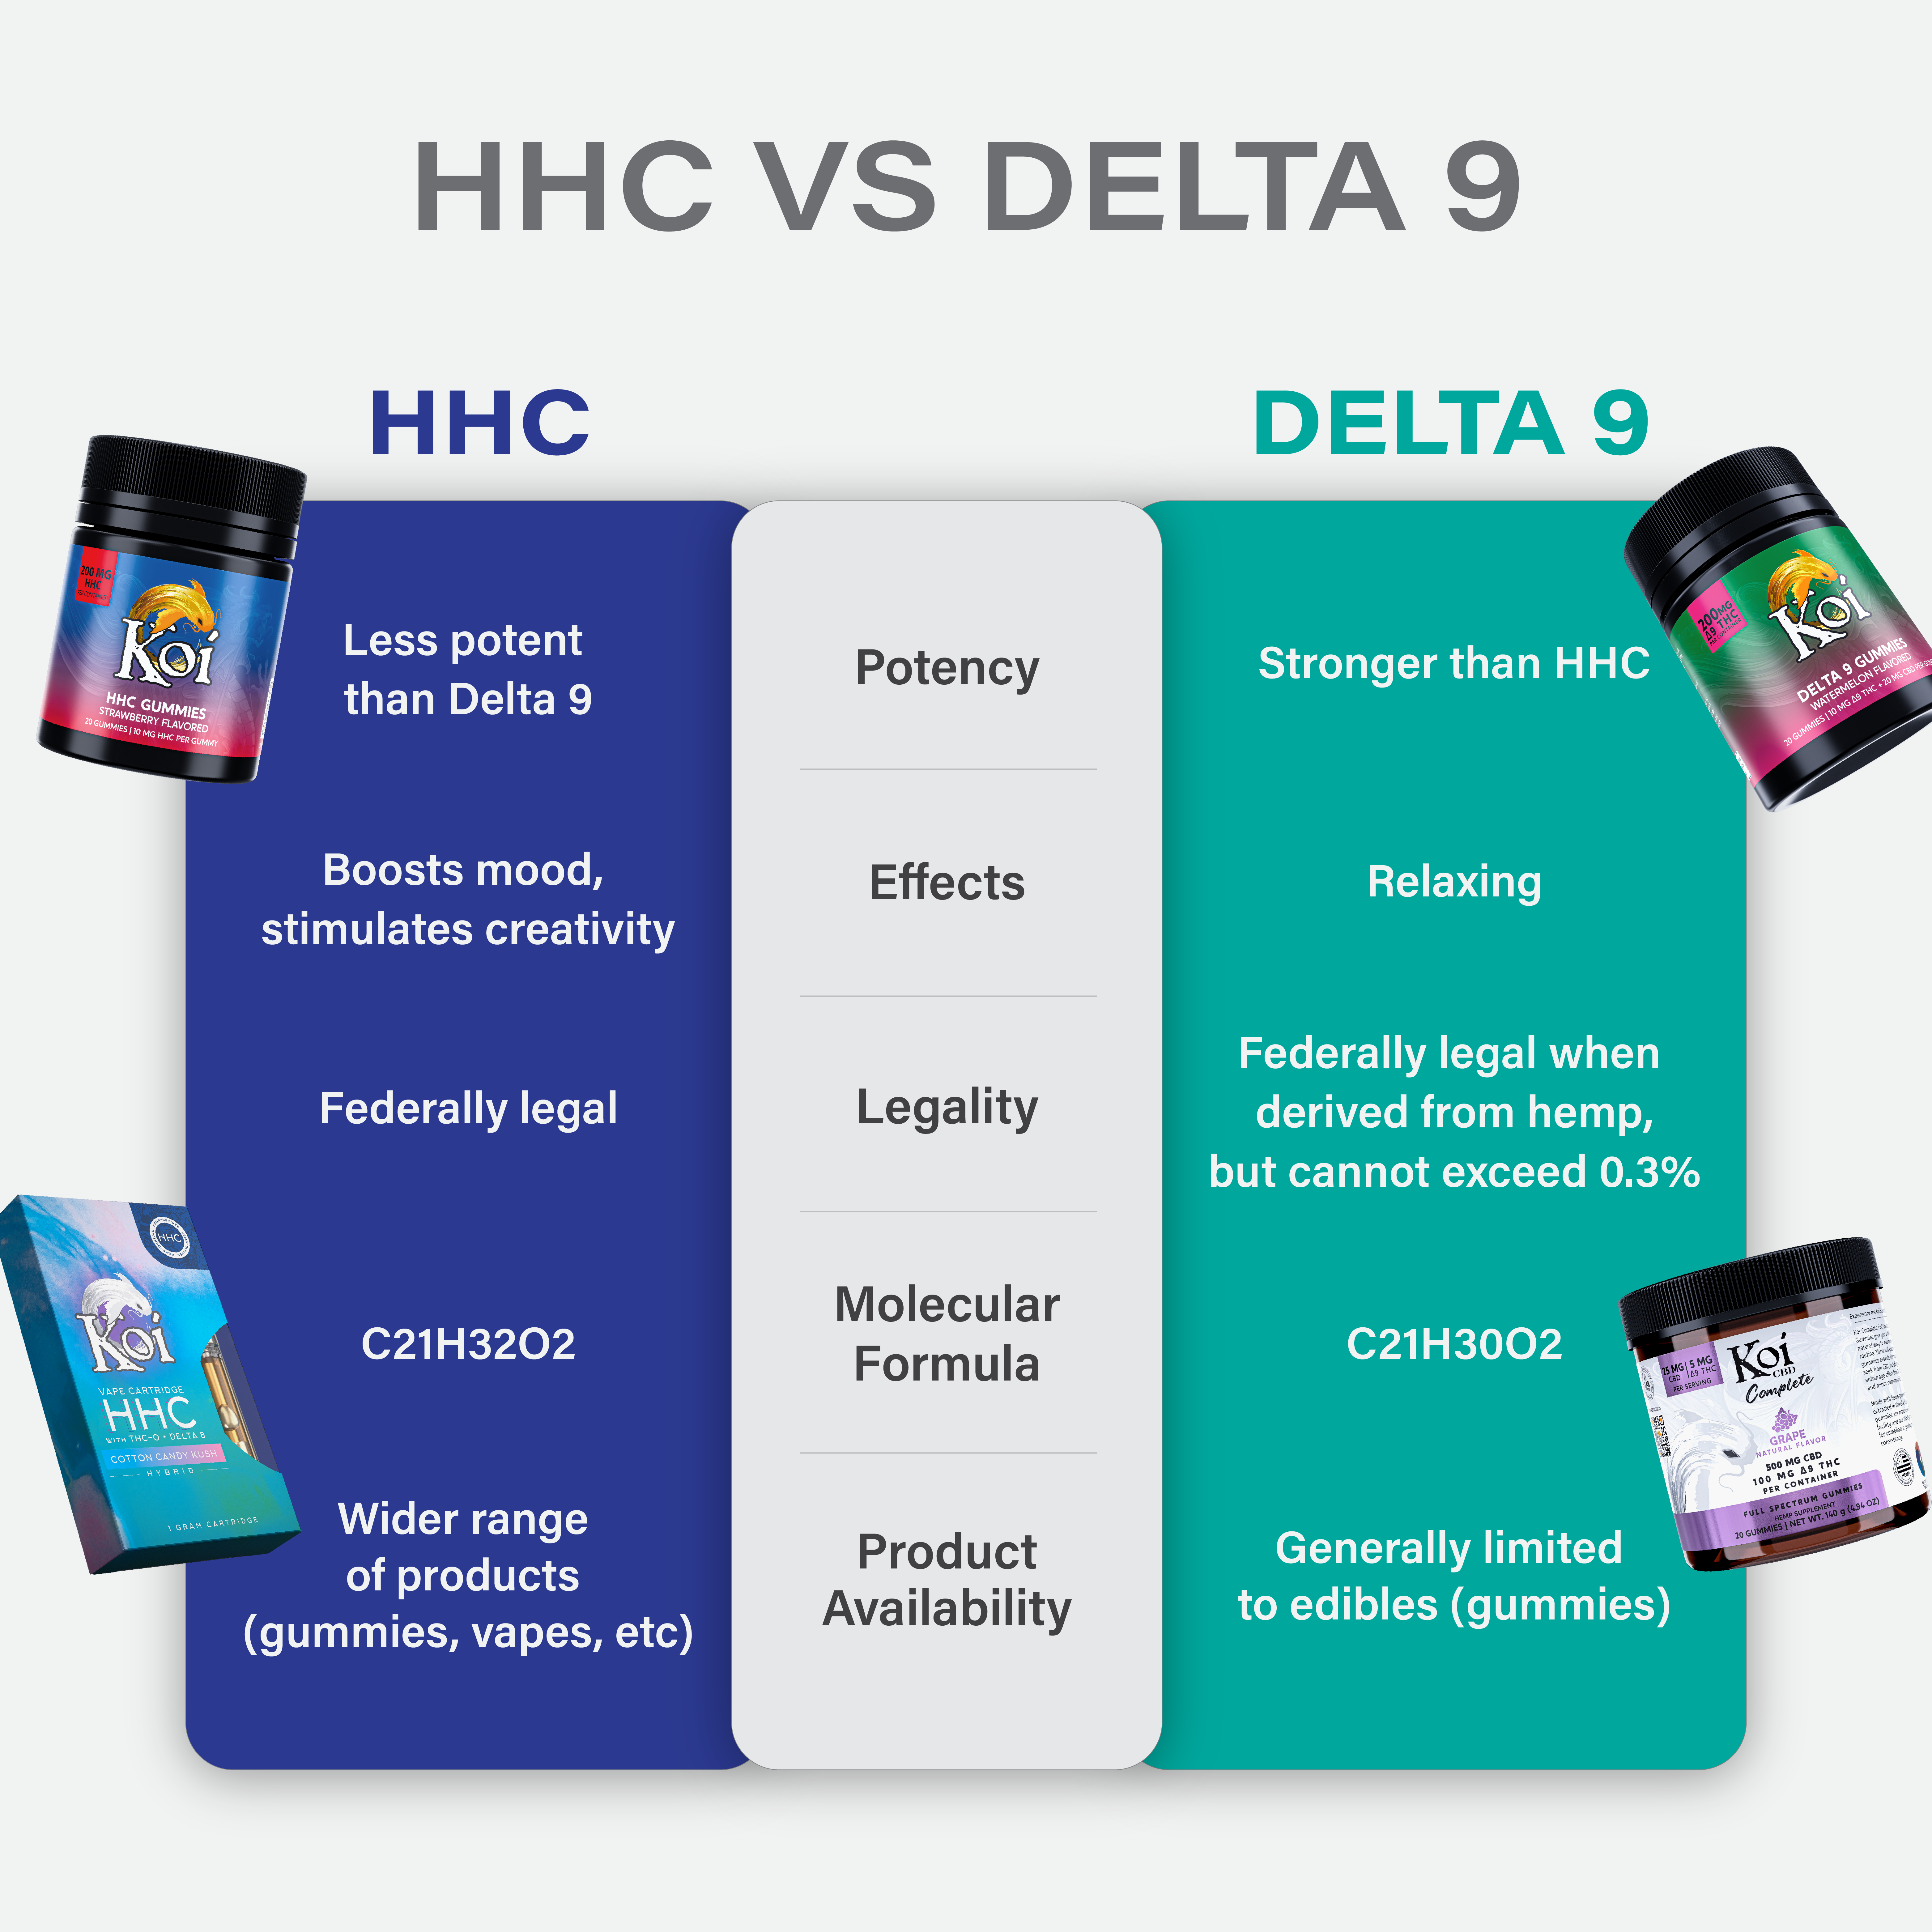 Table comparing HHC and Delta 9